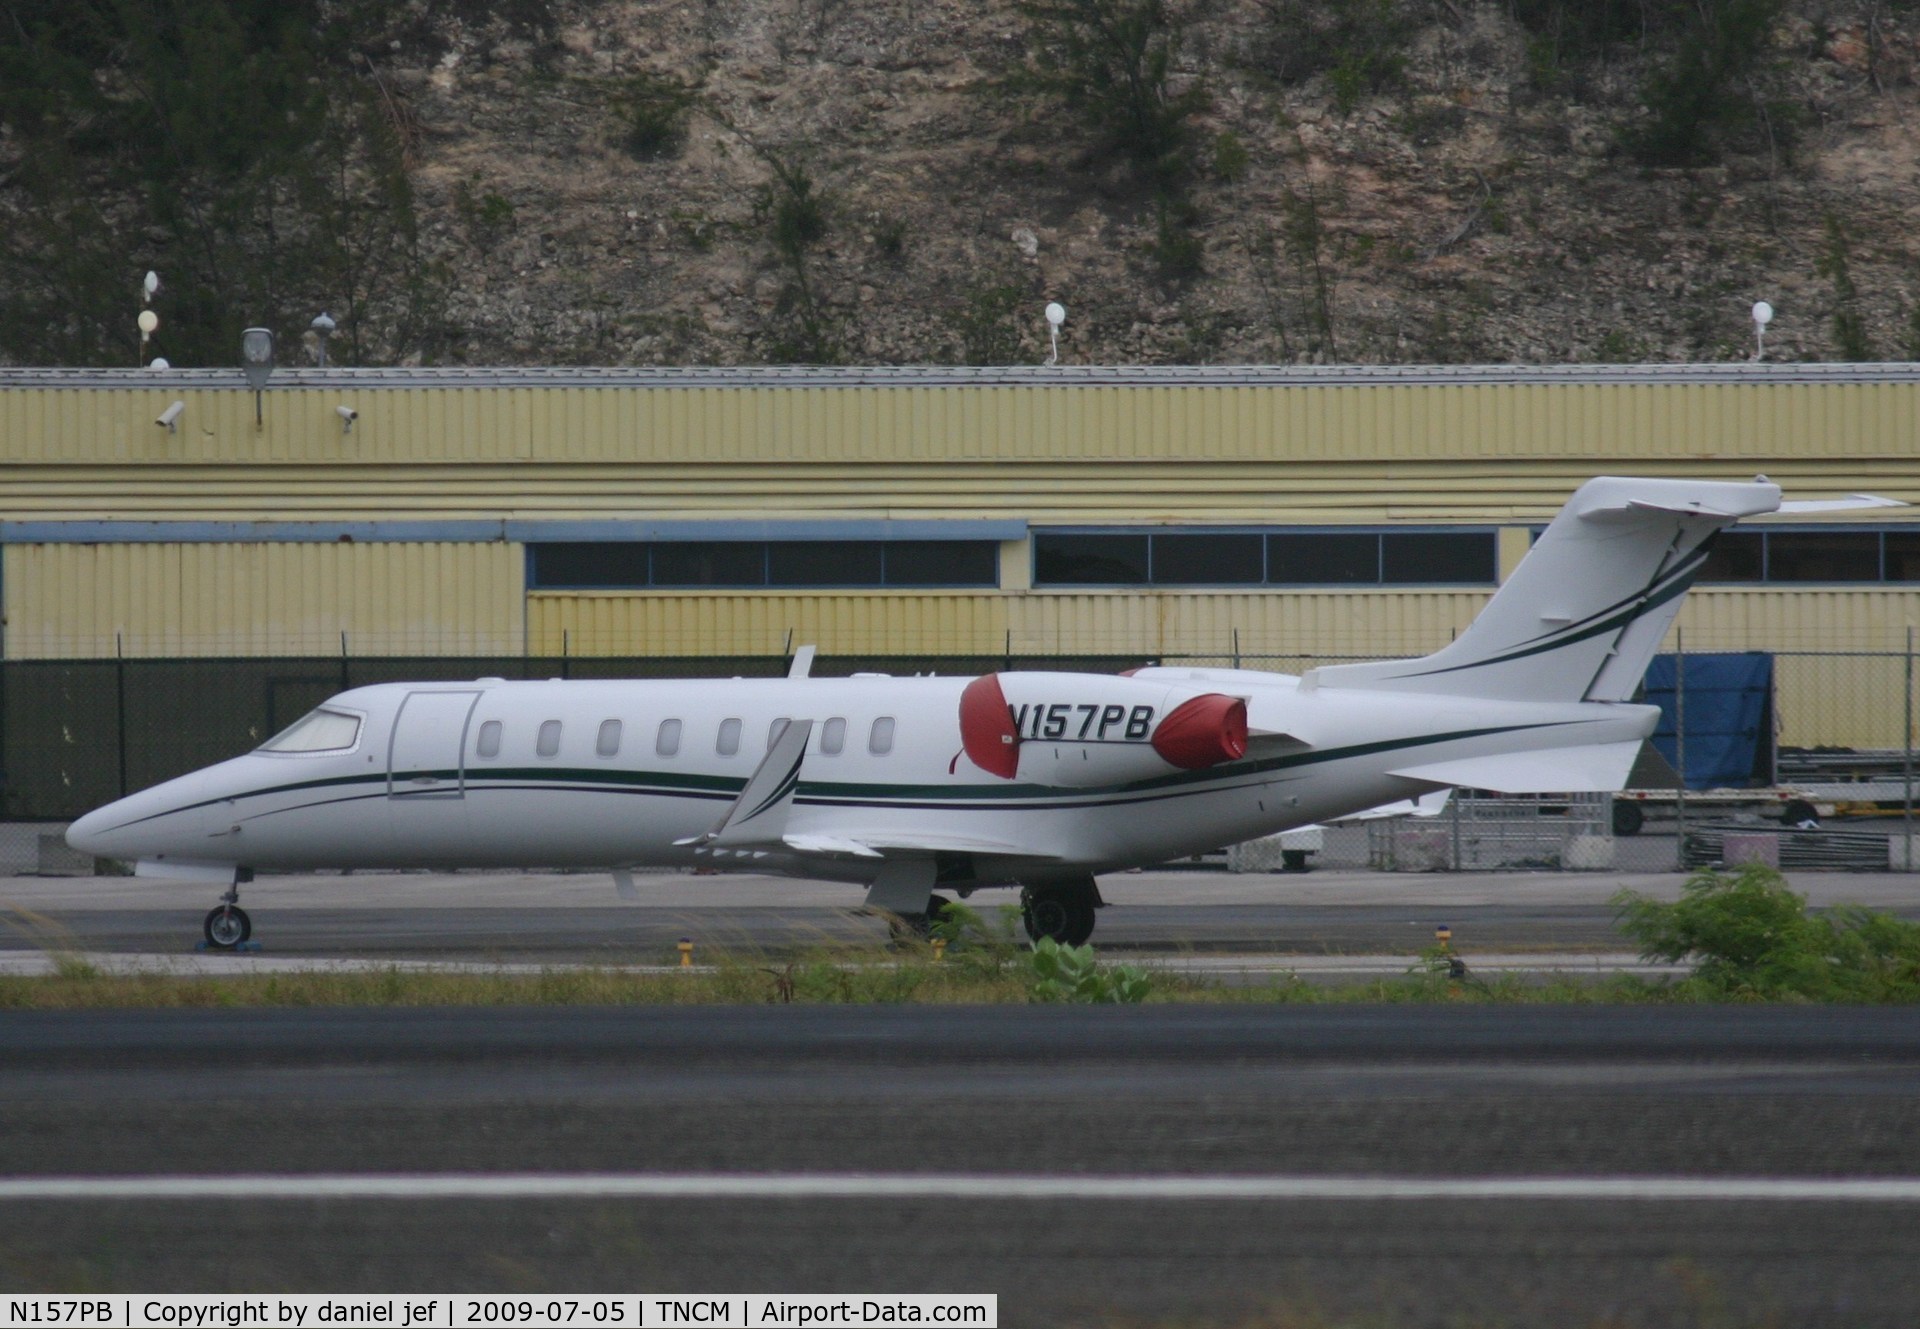 N157PB, 1998 Learjet 45 C/N 030, park at the cargo ramp